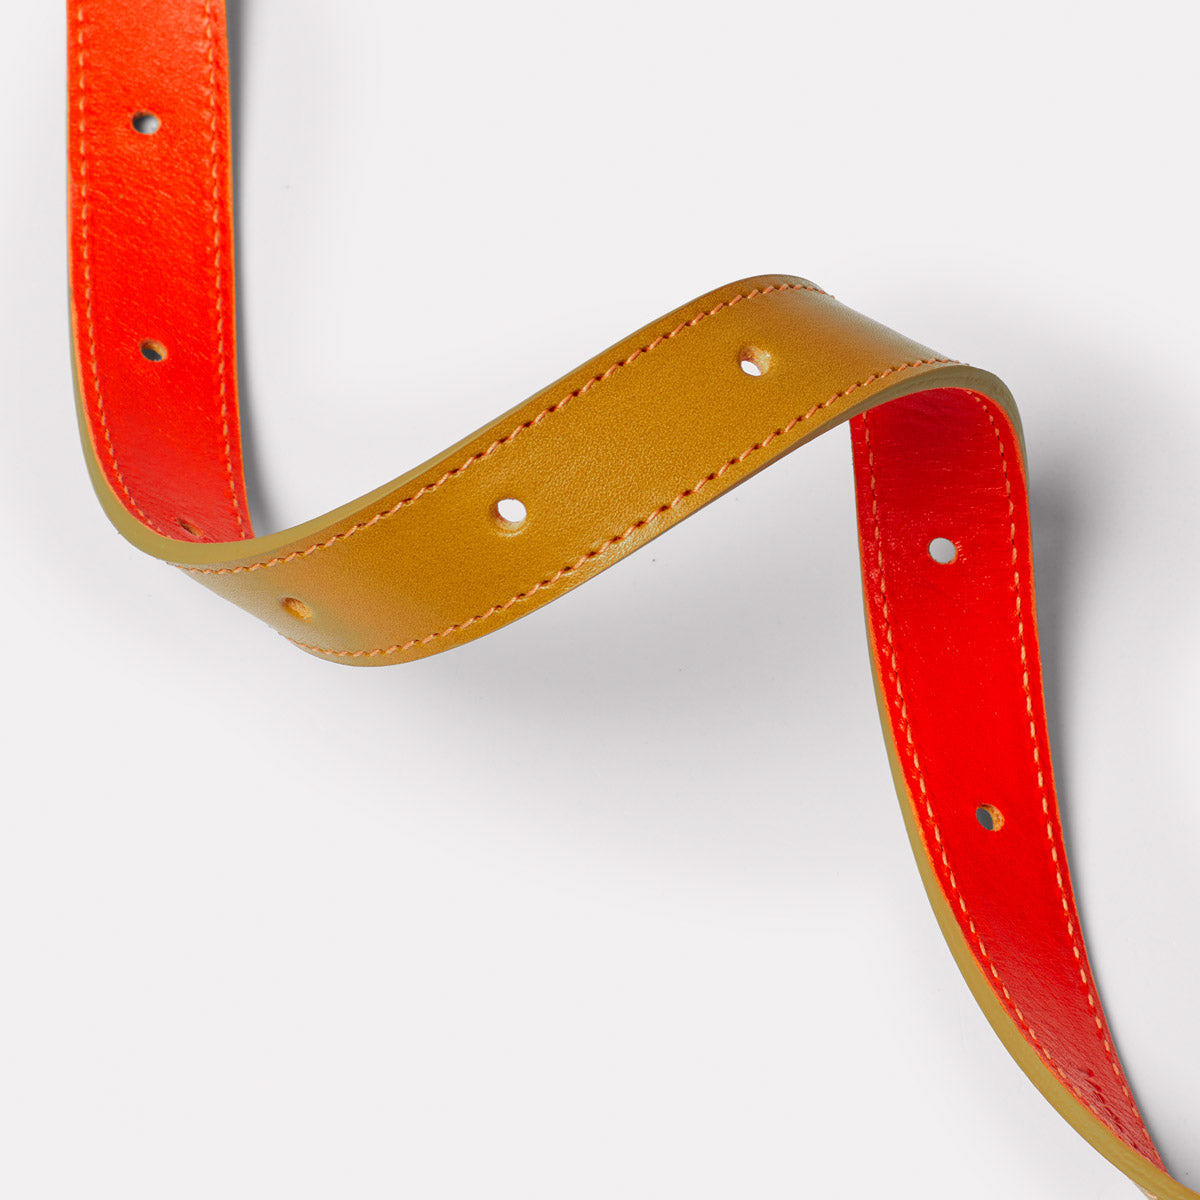 Pierce Leather Belt in Mustard and Flame